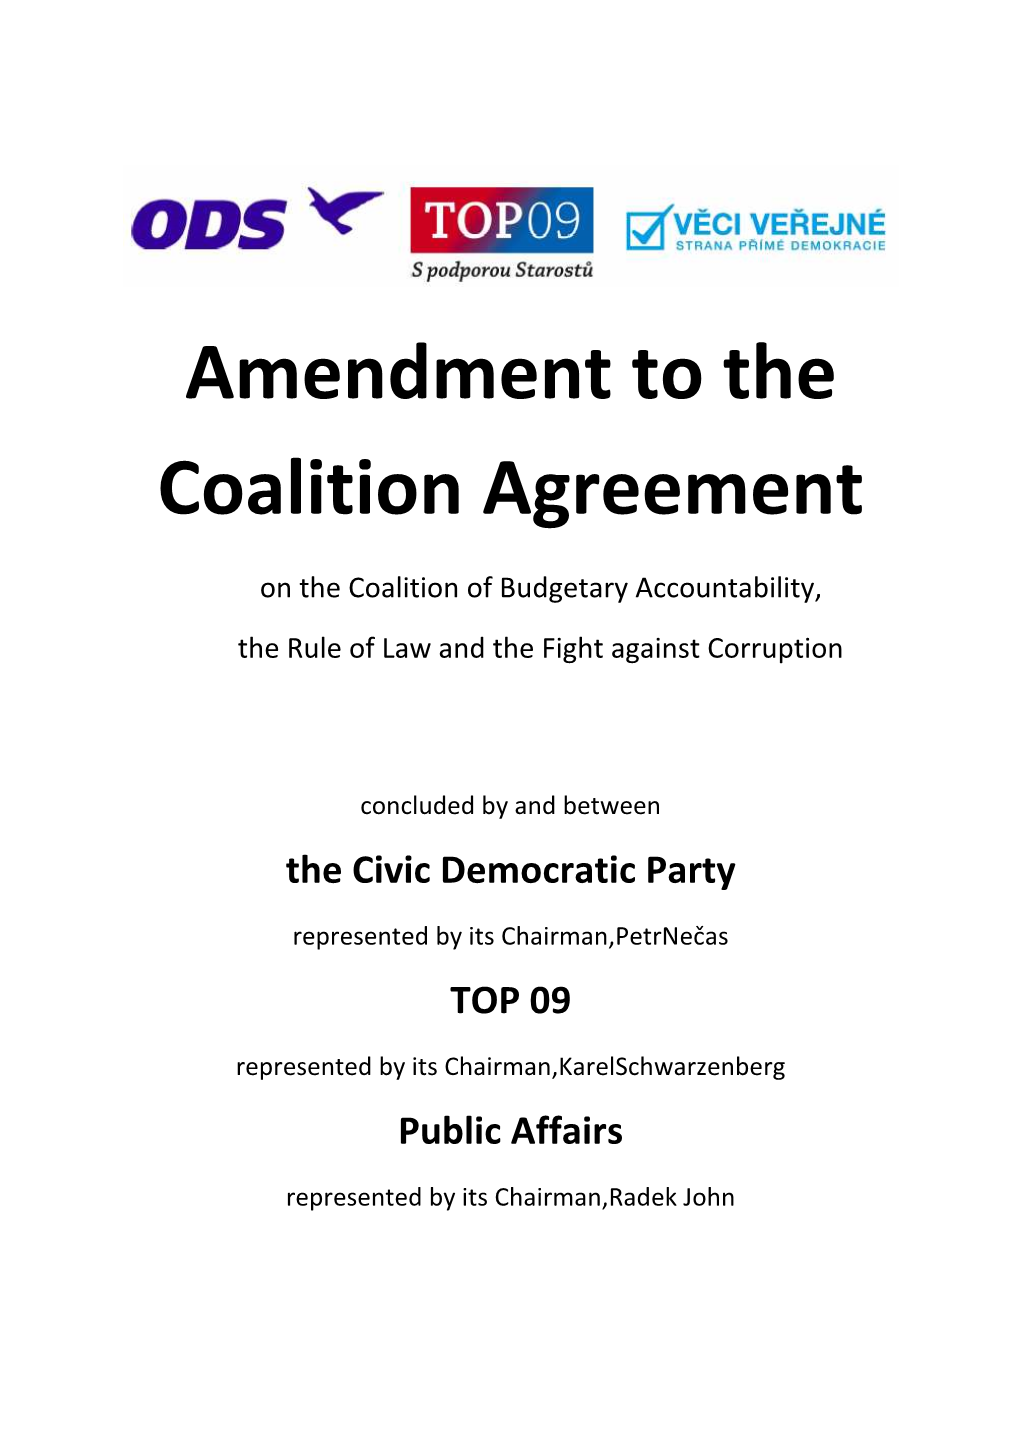 Amendment to the Coalition Agreement